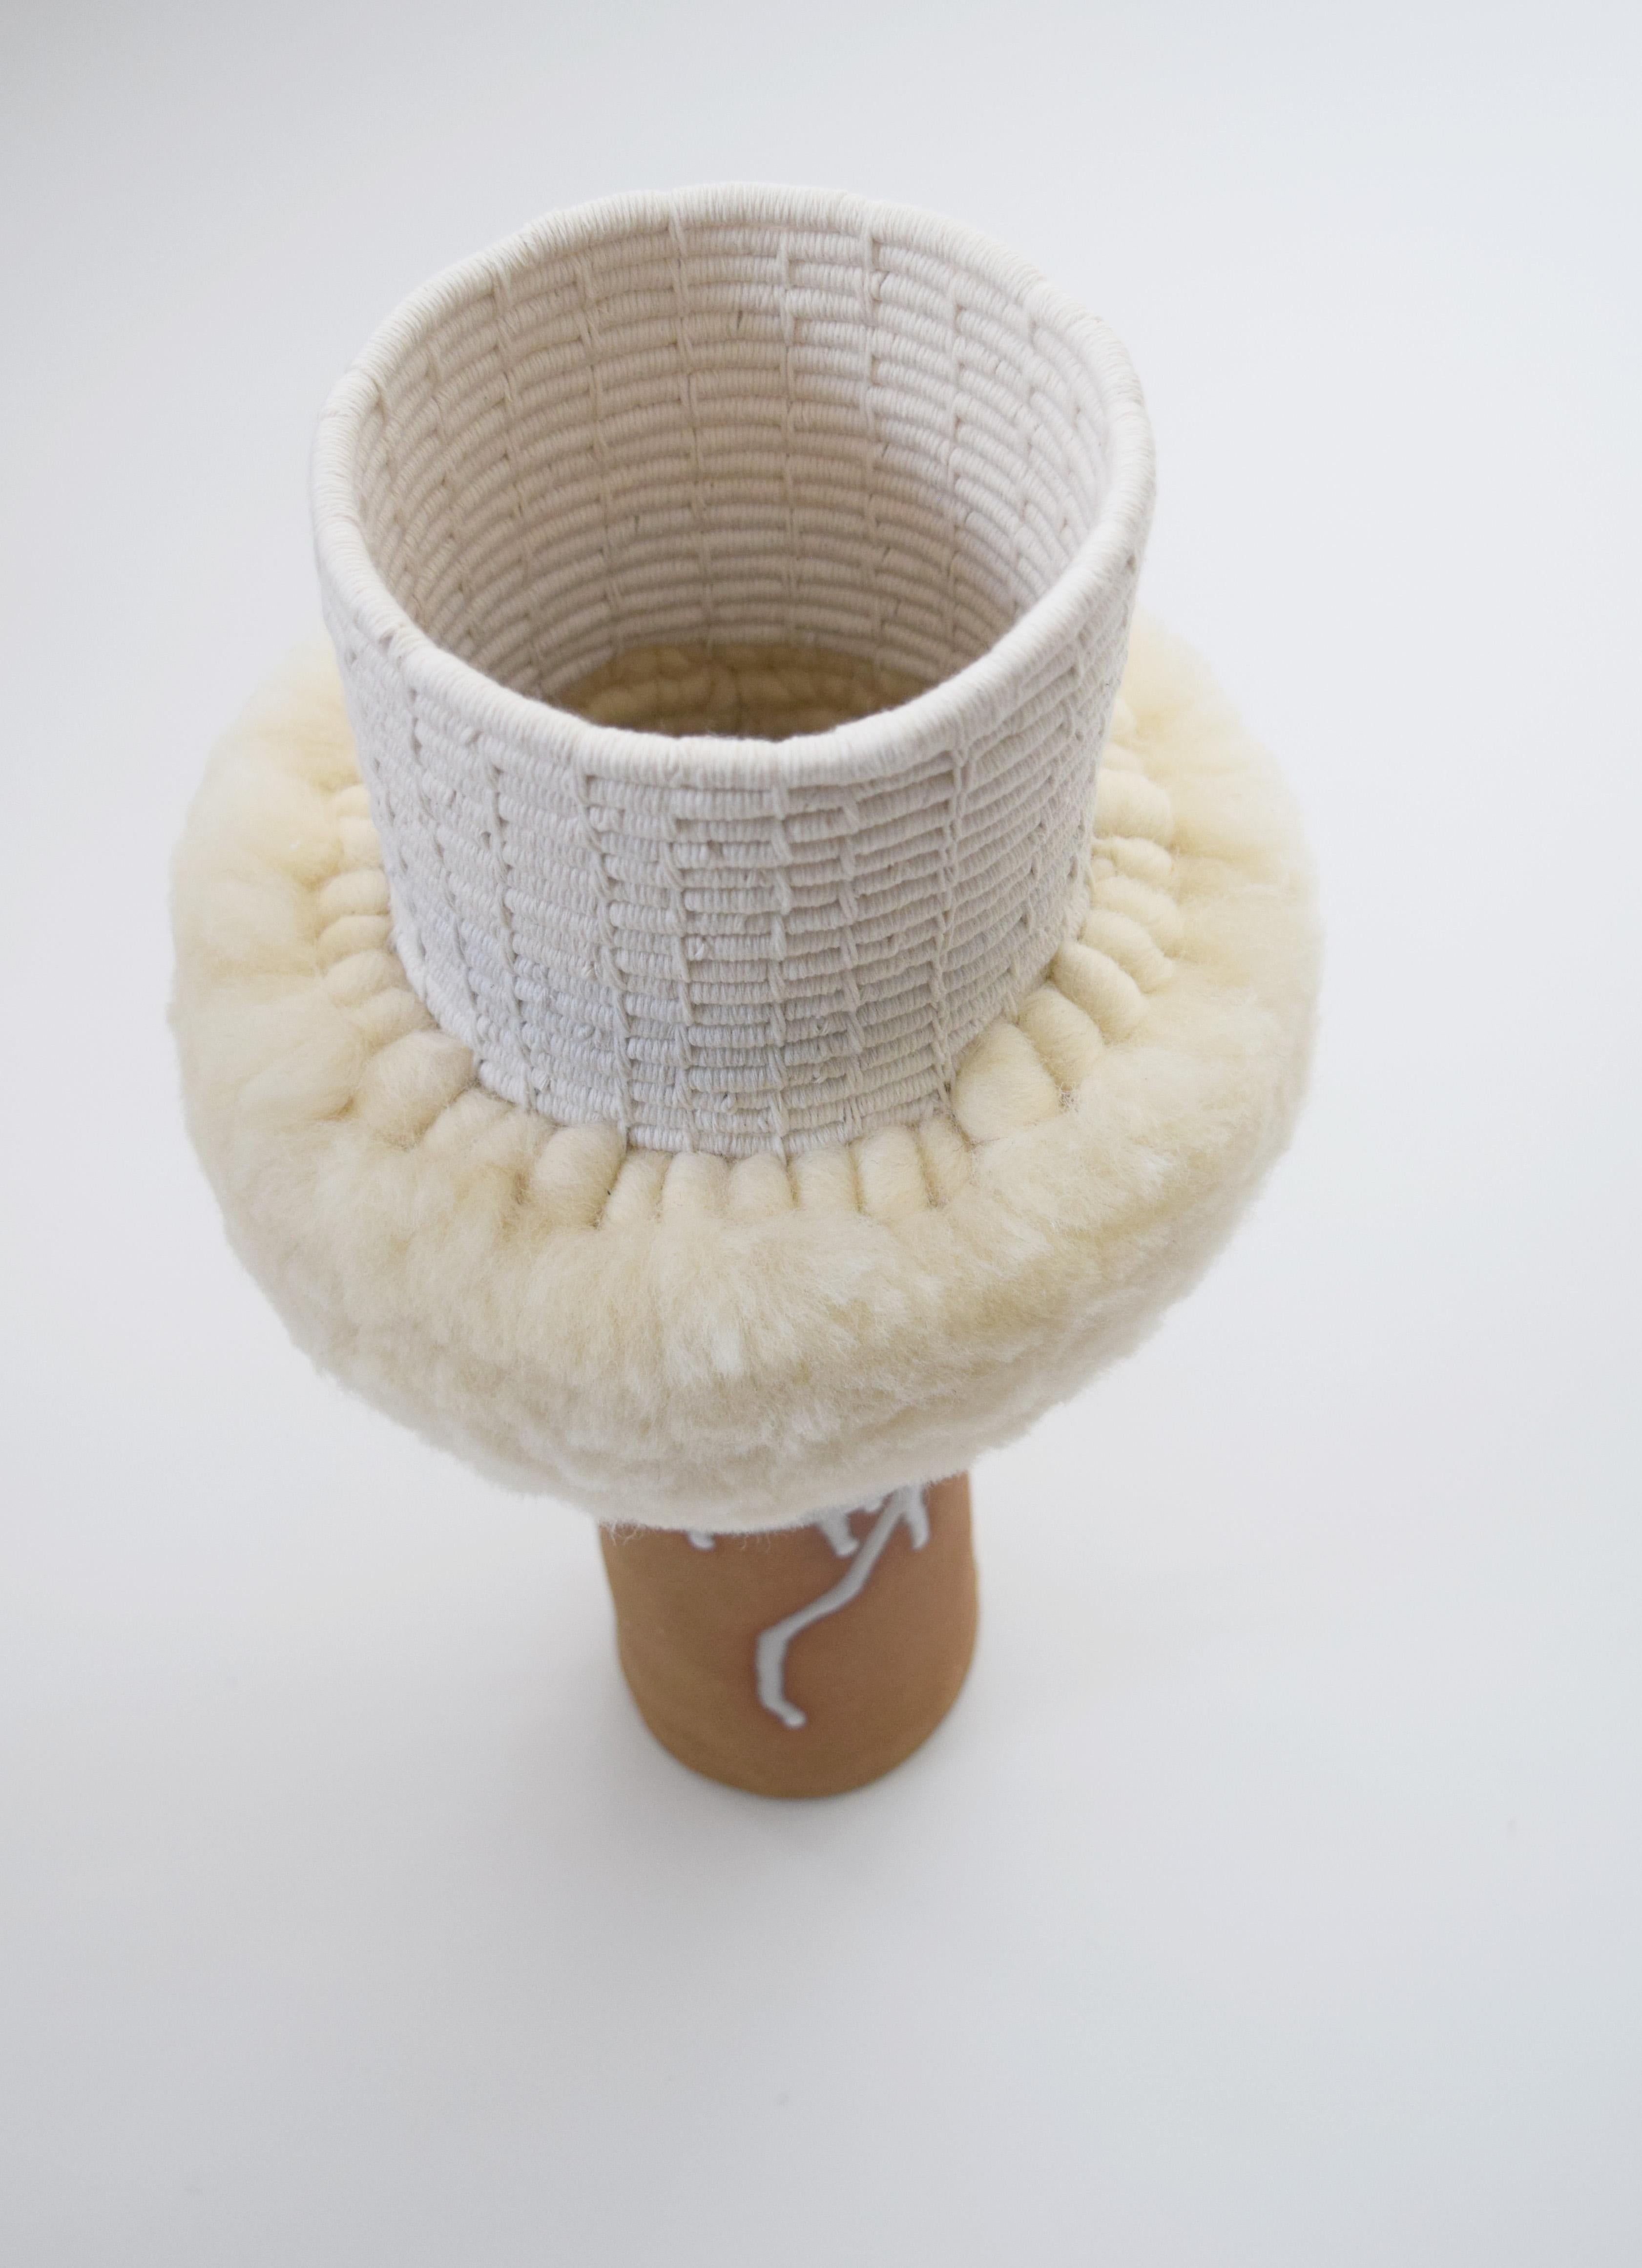 Hand-Crafted One of a Kind Ceramic and Woven Cotton Vessel in Natural/White with Wool Detail